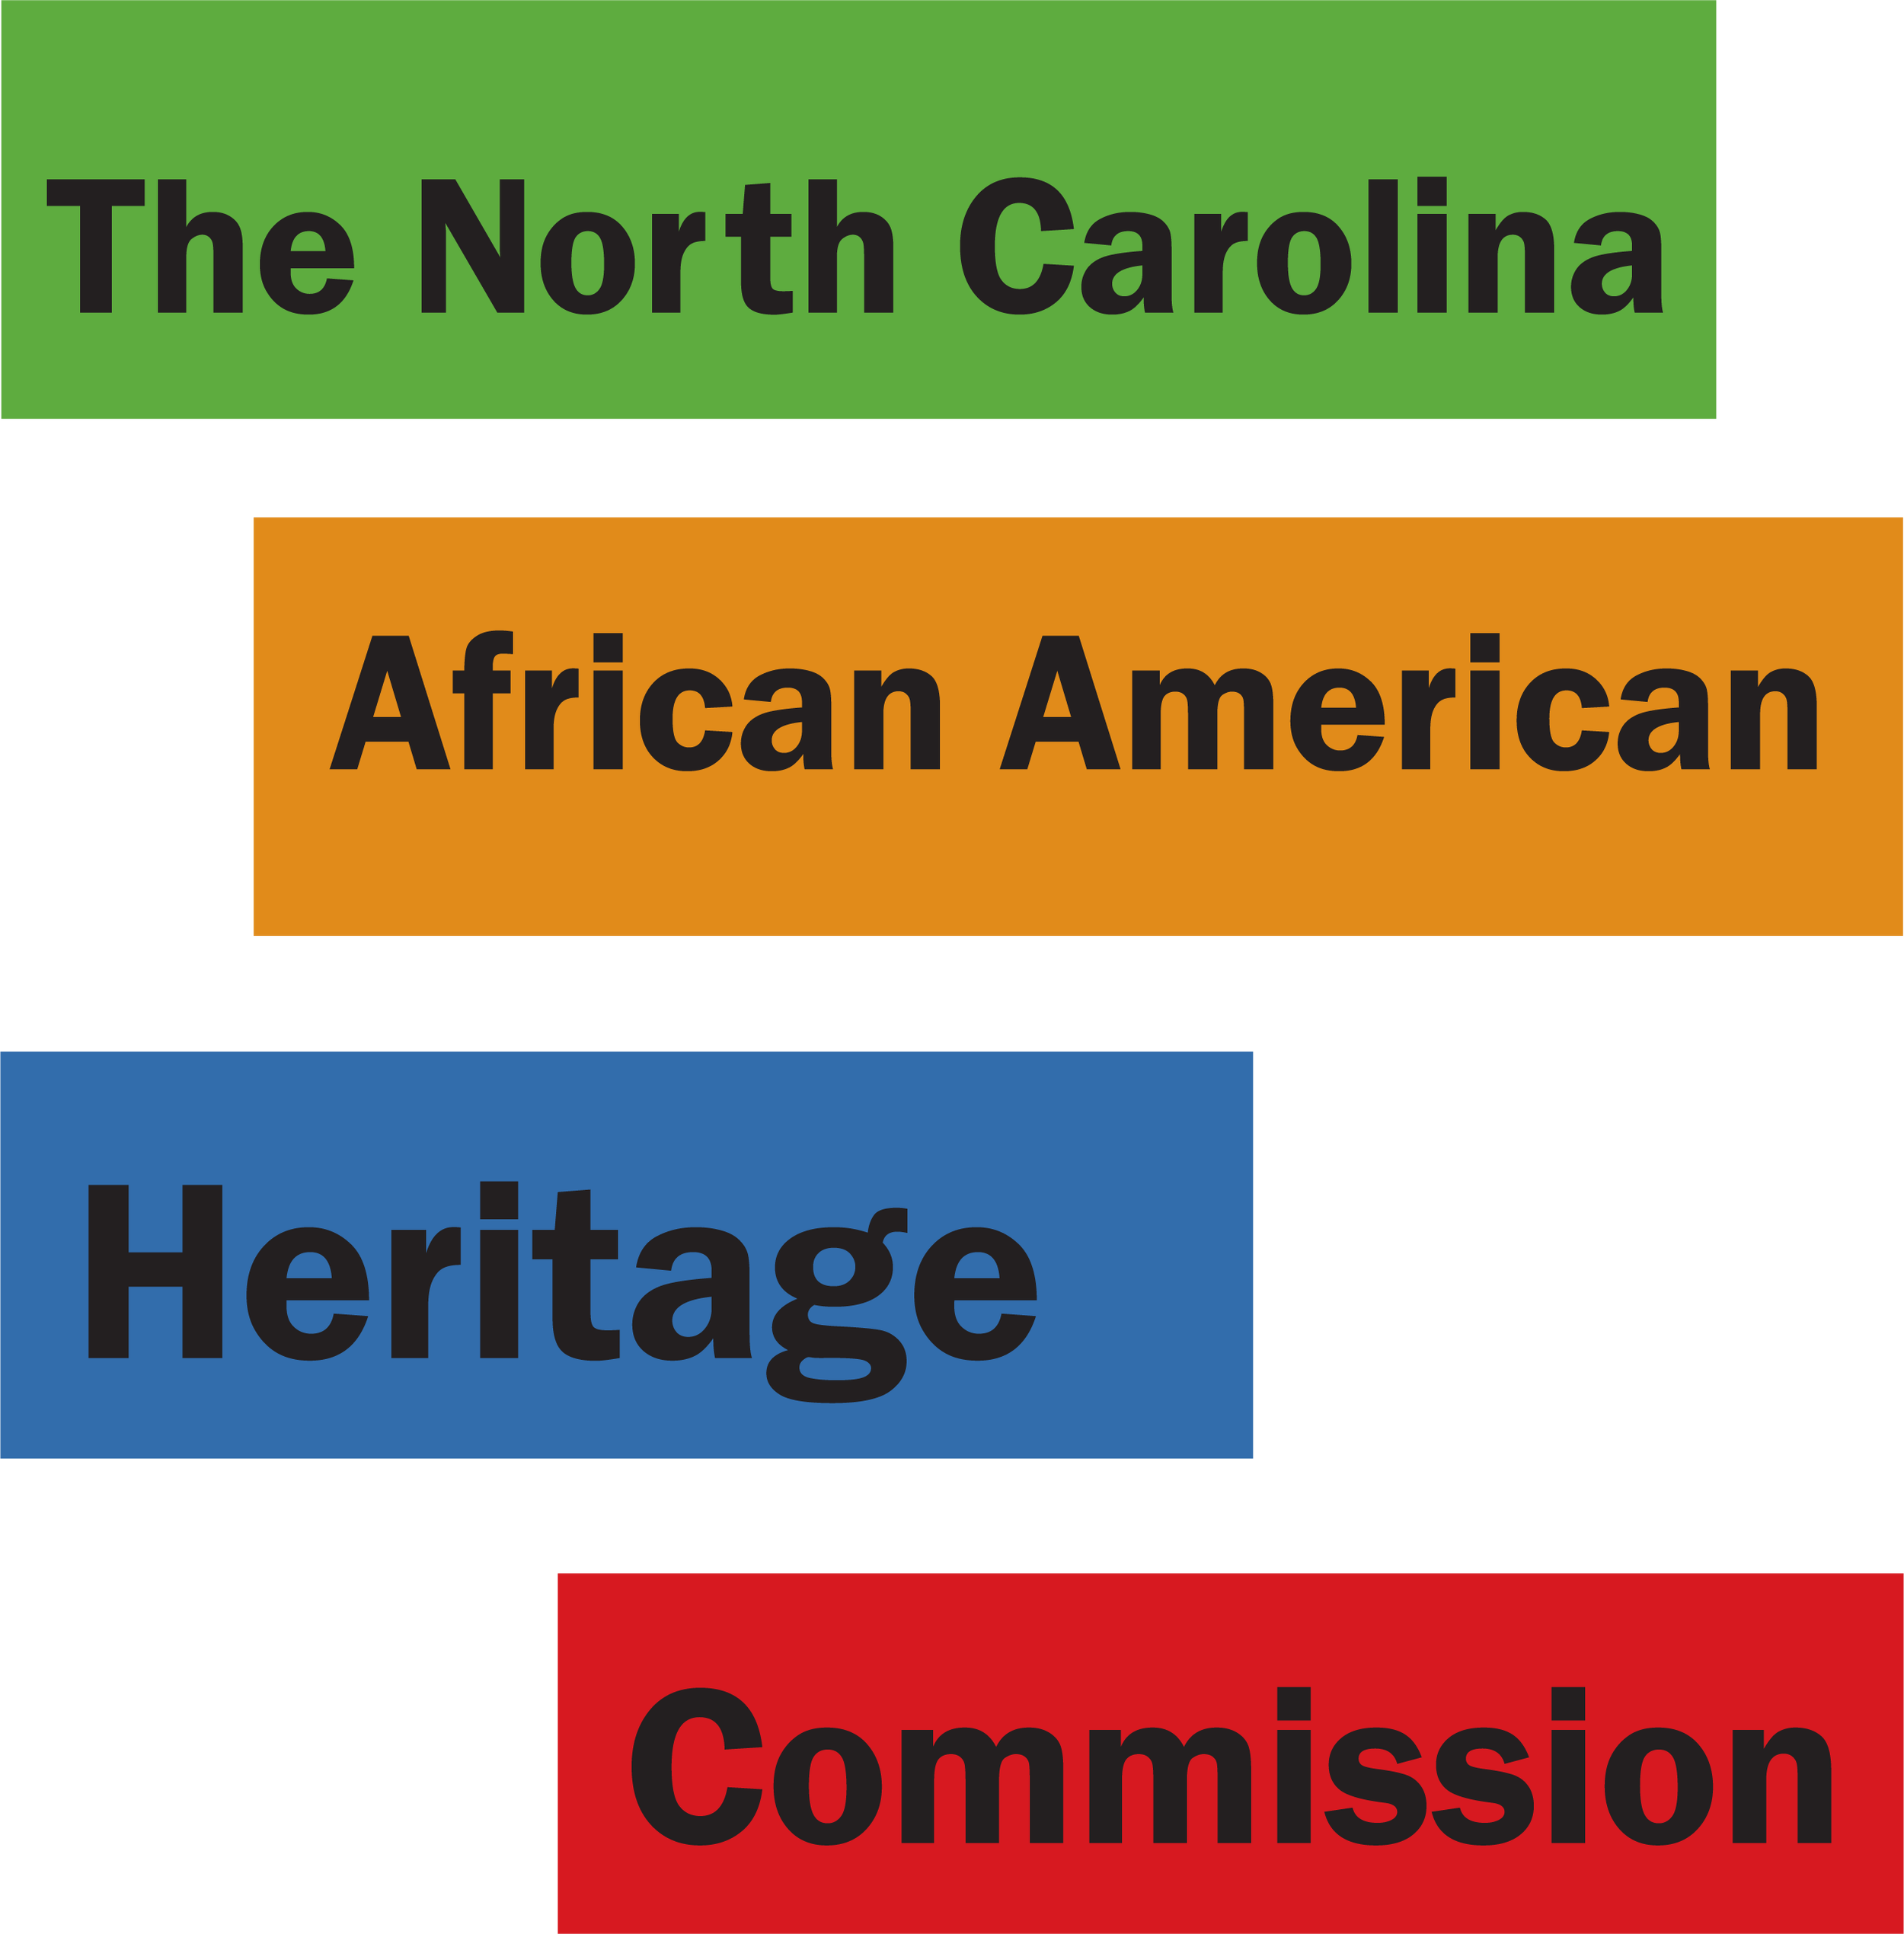 NC African American Heritage Commision Logo - RB Pamela Smith.png